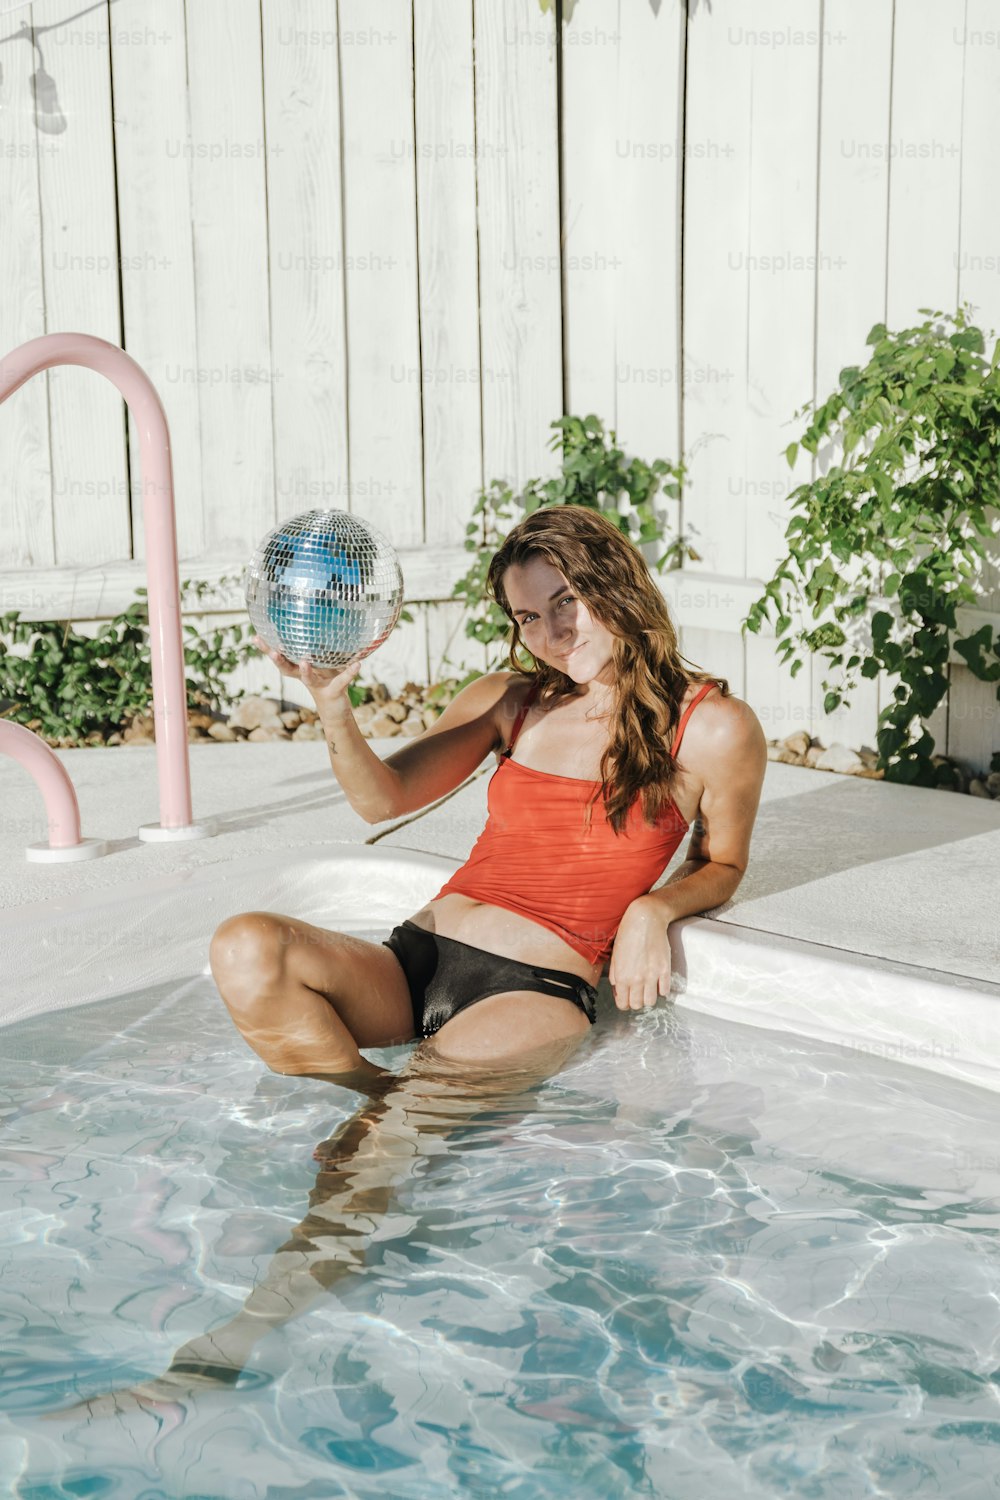 a woman sitting in a pool holding a disco ball